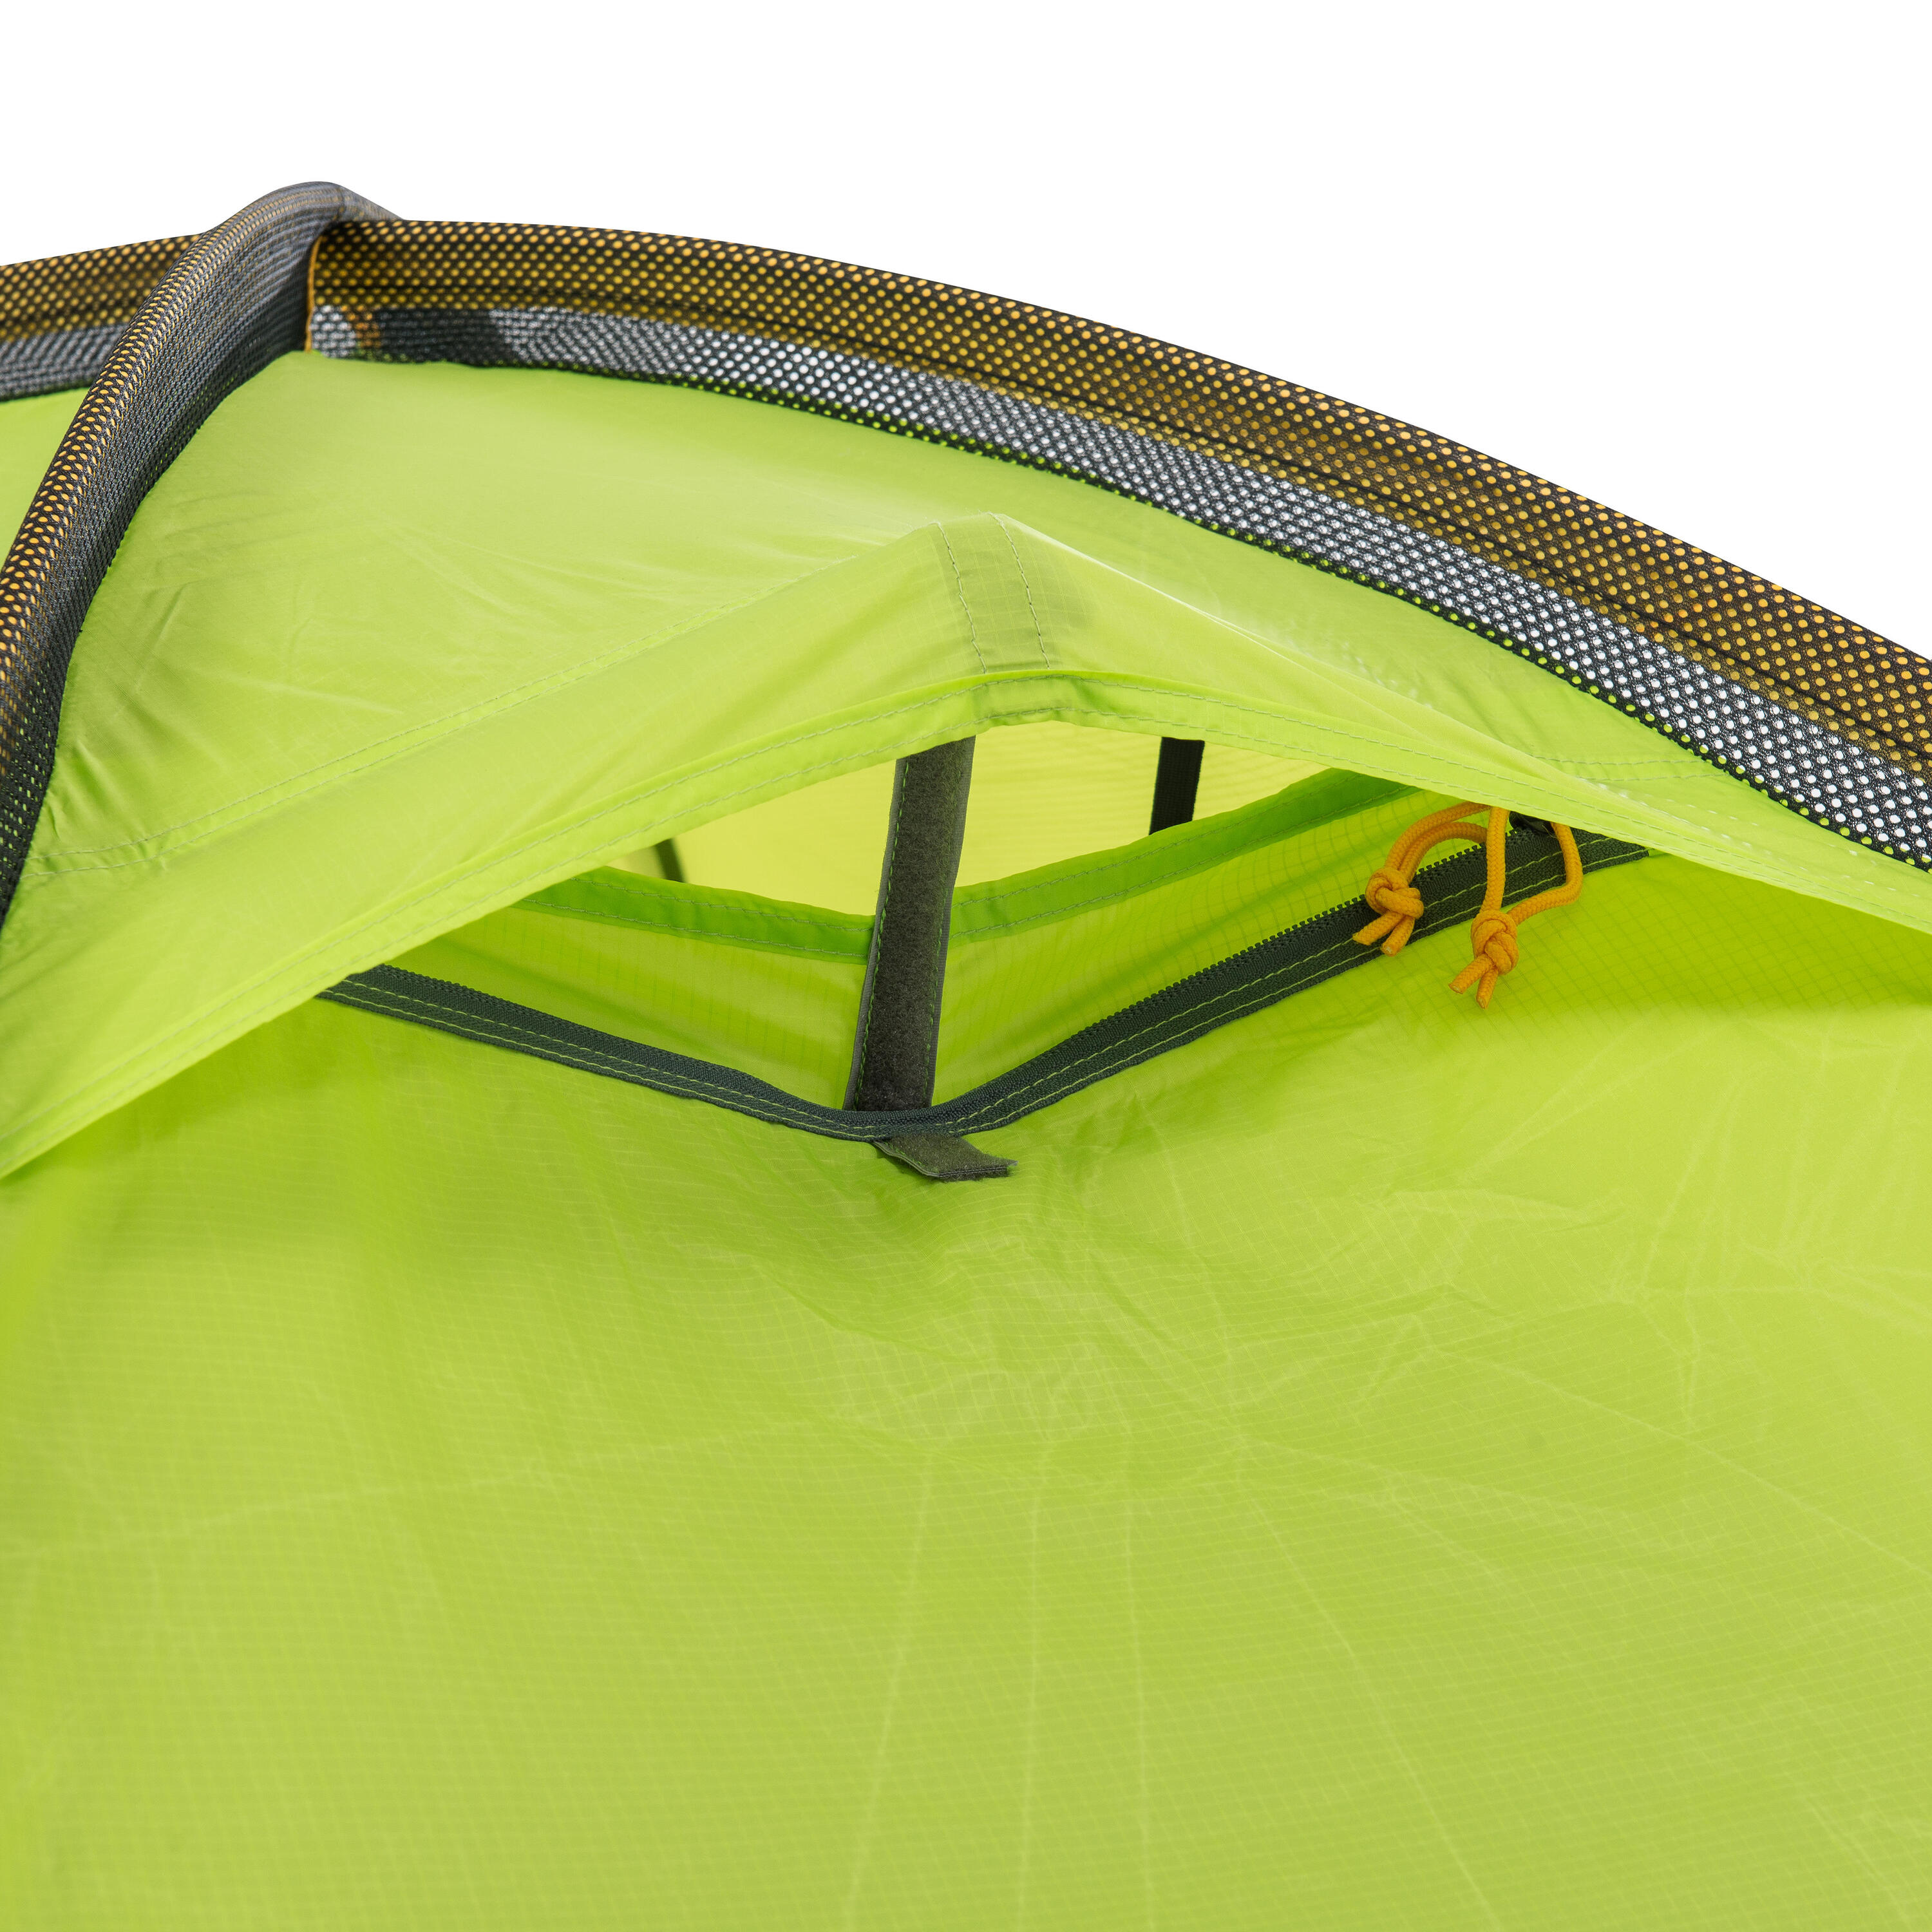 2-person mountaineering tent - Makalu T2 6/8